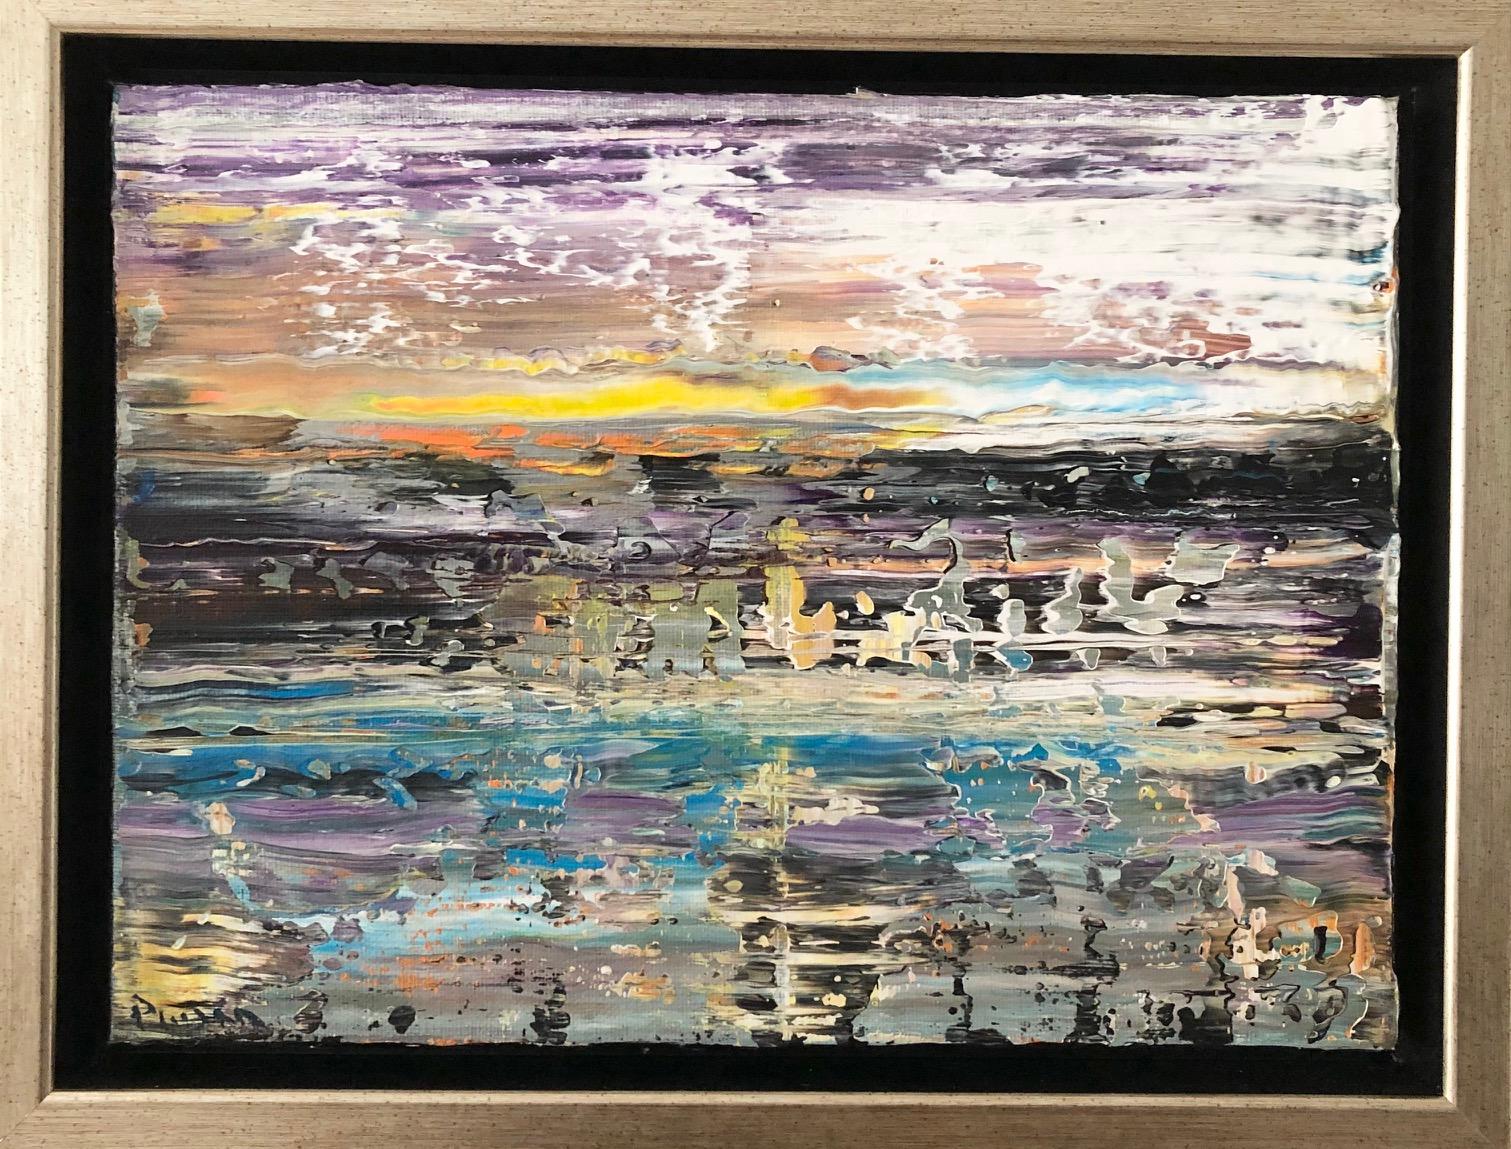 “Venus Sunrise” is an original, one of a kind, purple, yellow, white, black, blue, contemporary, acrylic on canvas, abstract painting. Vibrant pops of color work in harmony to create this unique, contemporary work of art by Andrew Plum. Signed recto